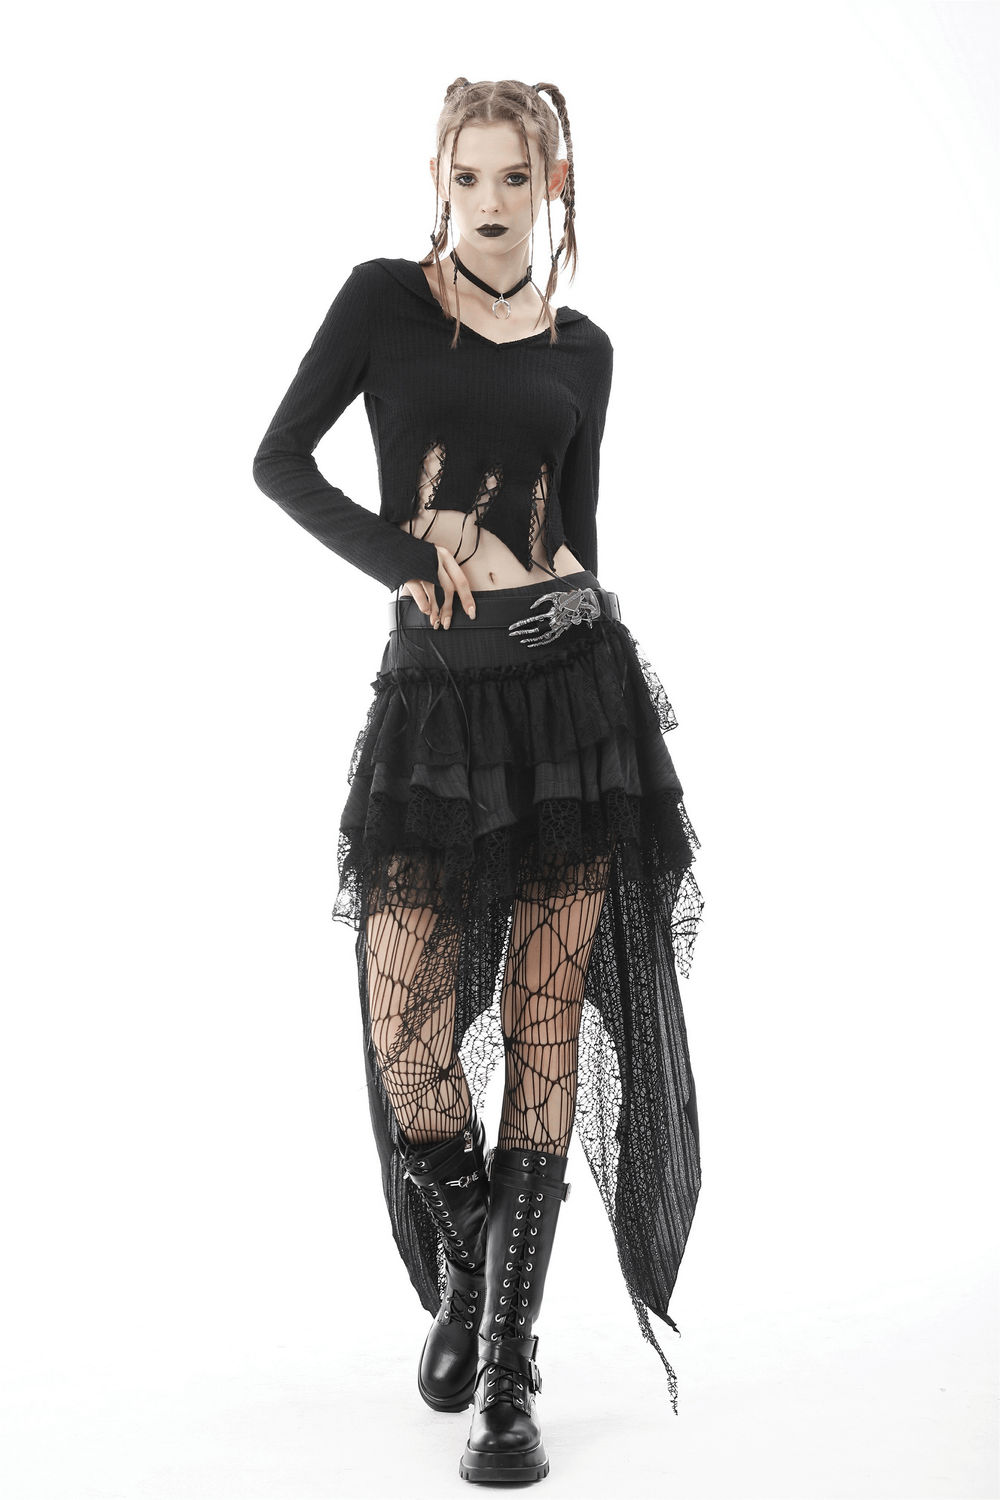 Gothic Women's Layered Lace Skirt with Fishnet Detail